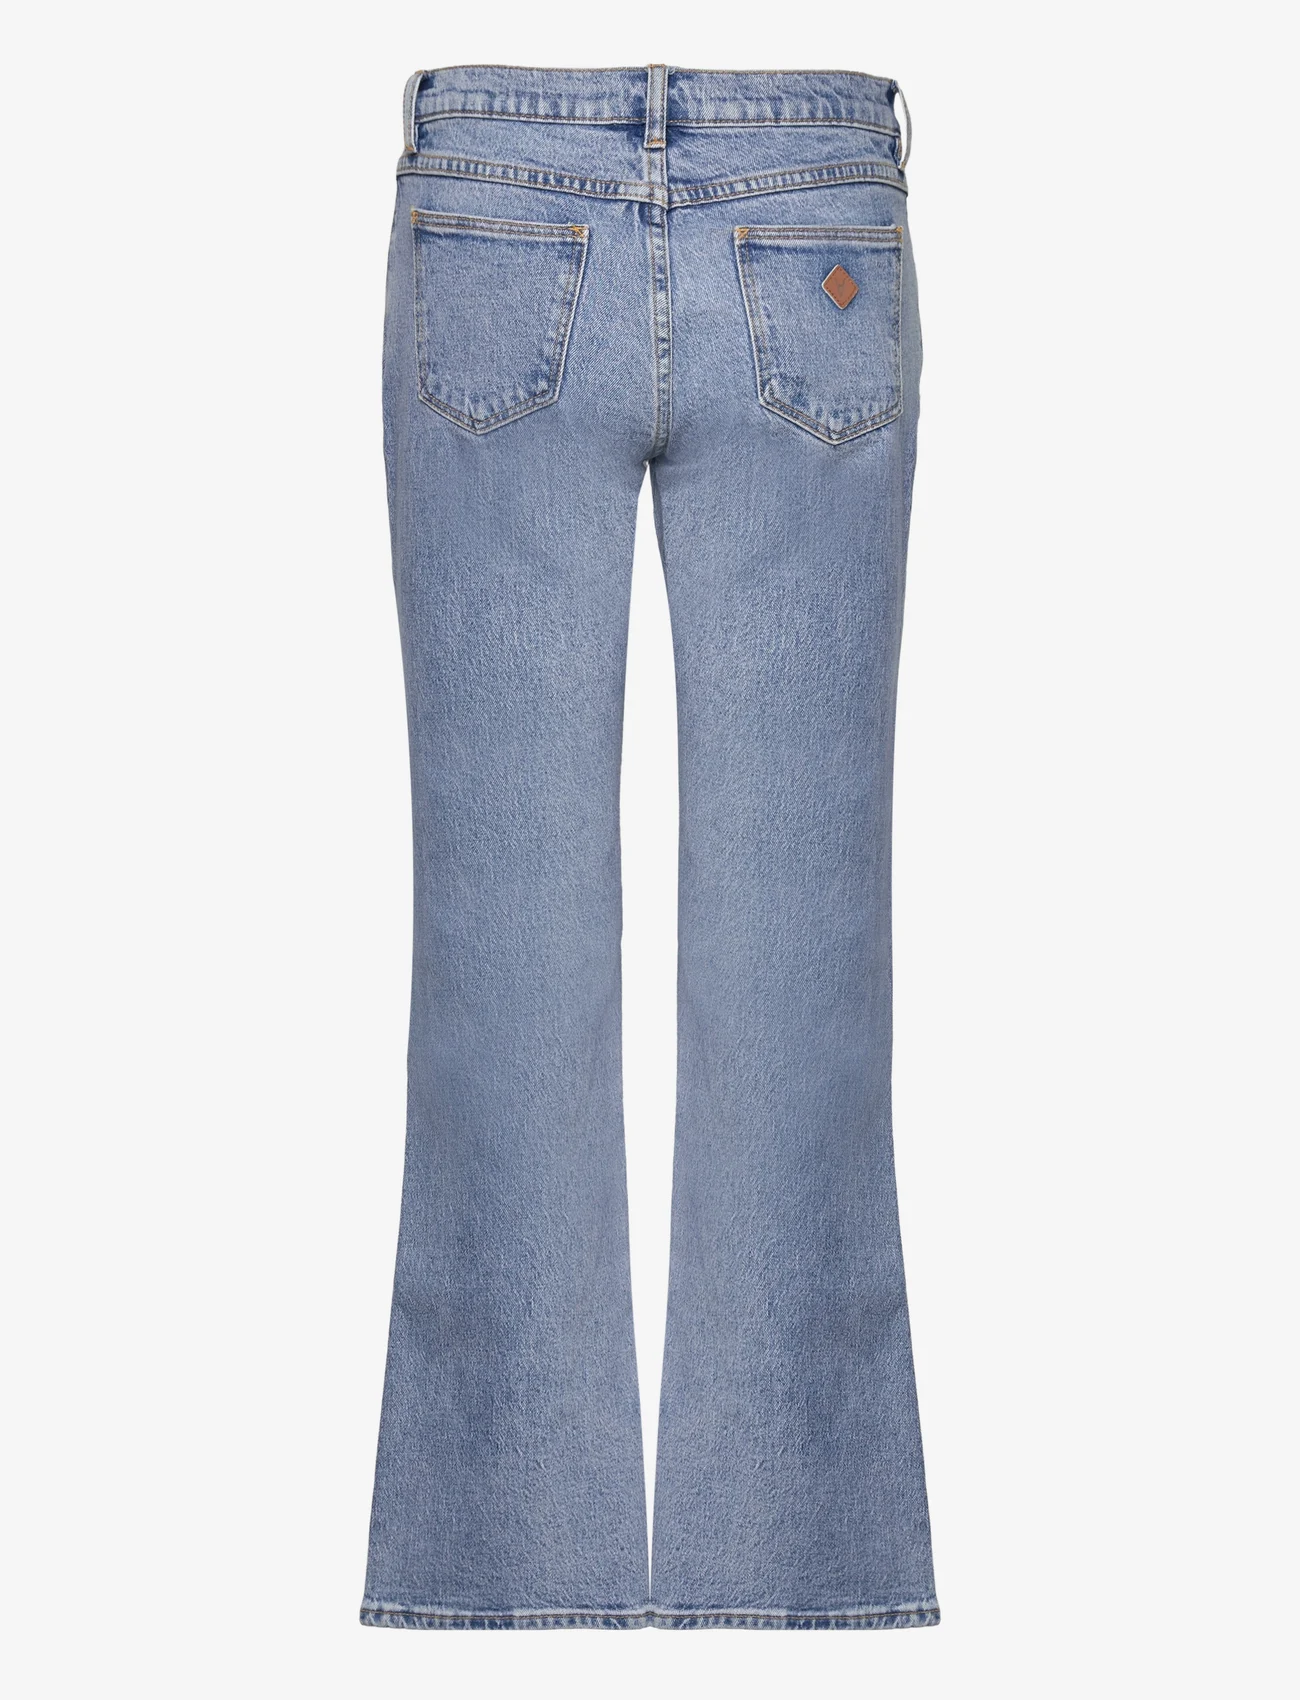 ABRAND - A 99 LOW BOOT ARIANE - flared jeans - blue - 1